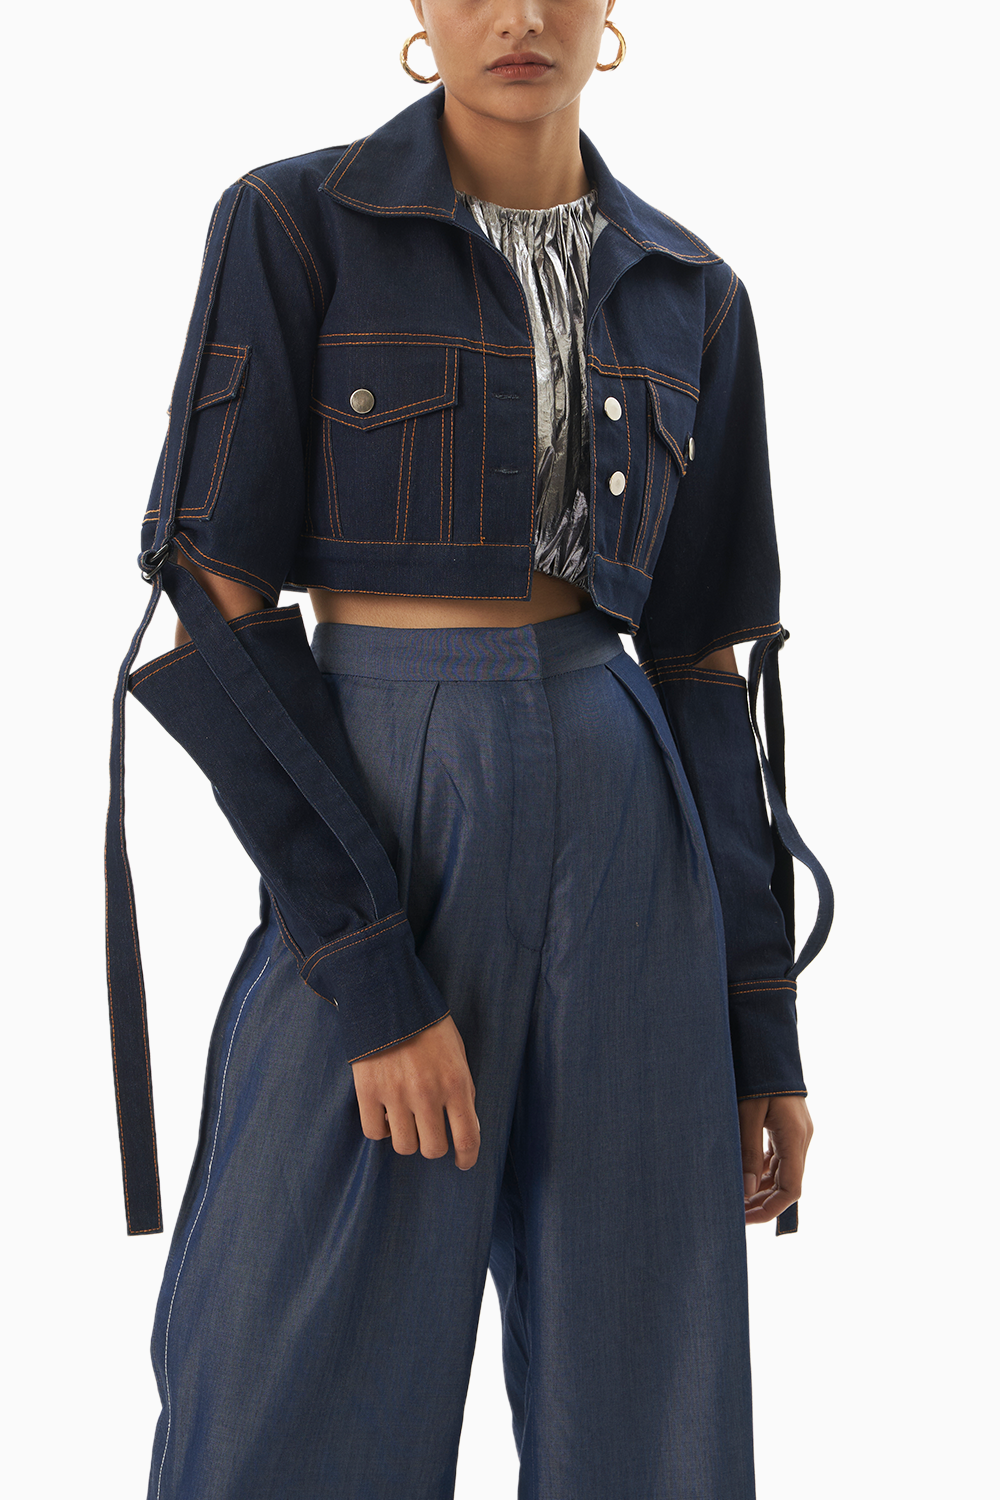 Ruched Foil Top with Denim Jacket & Trouser